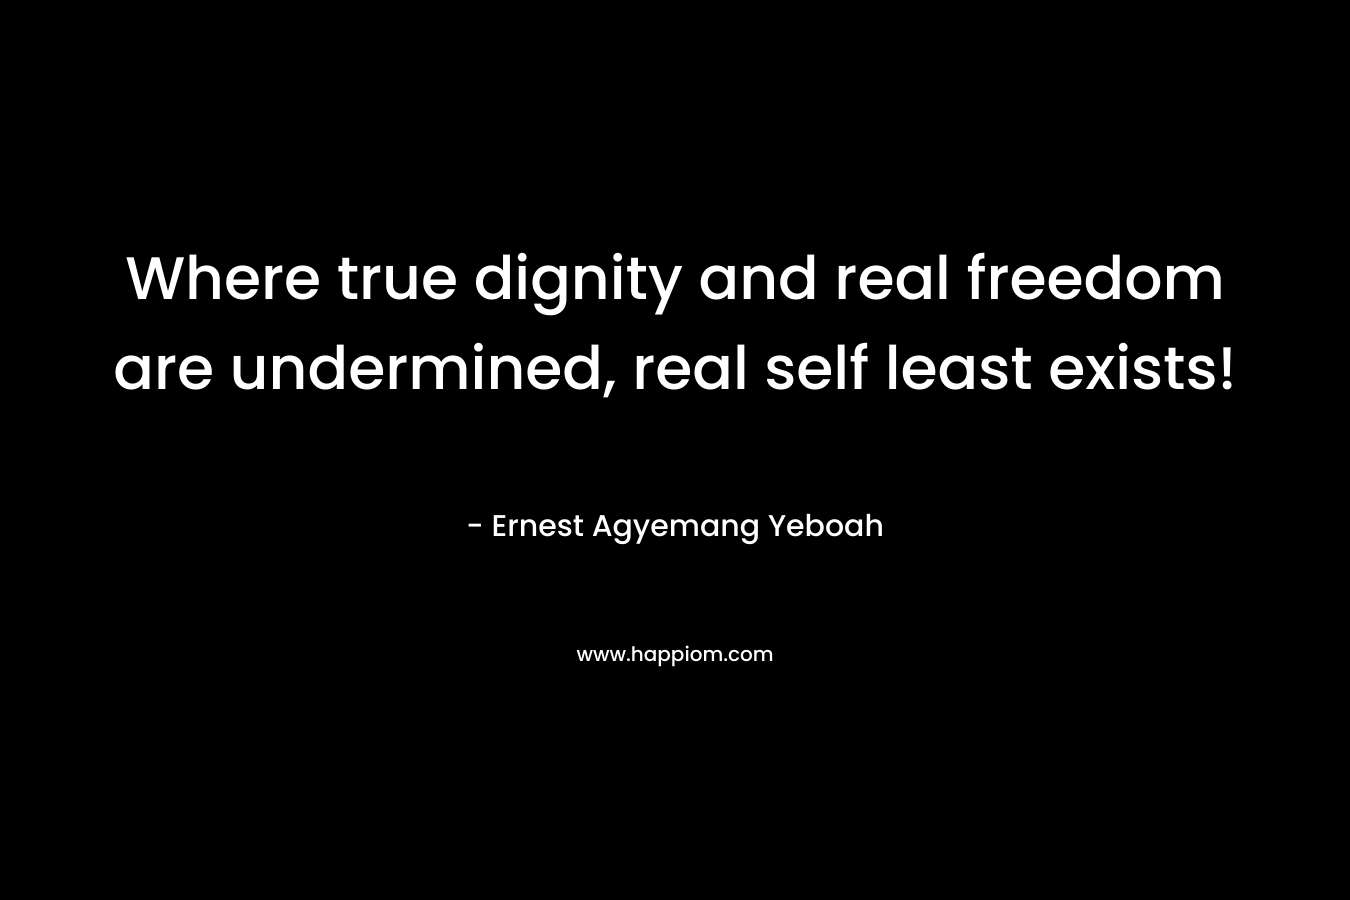 Where true dignity and real freedom are undermined, real self least exists!